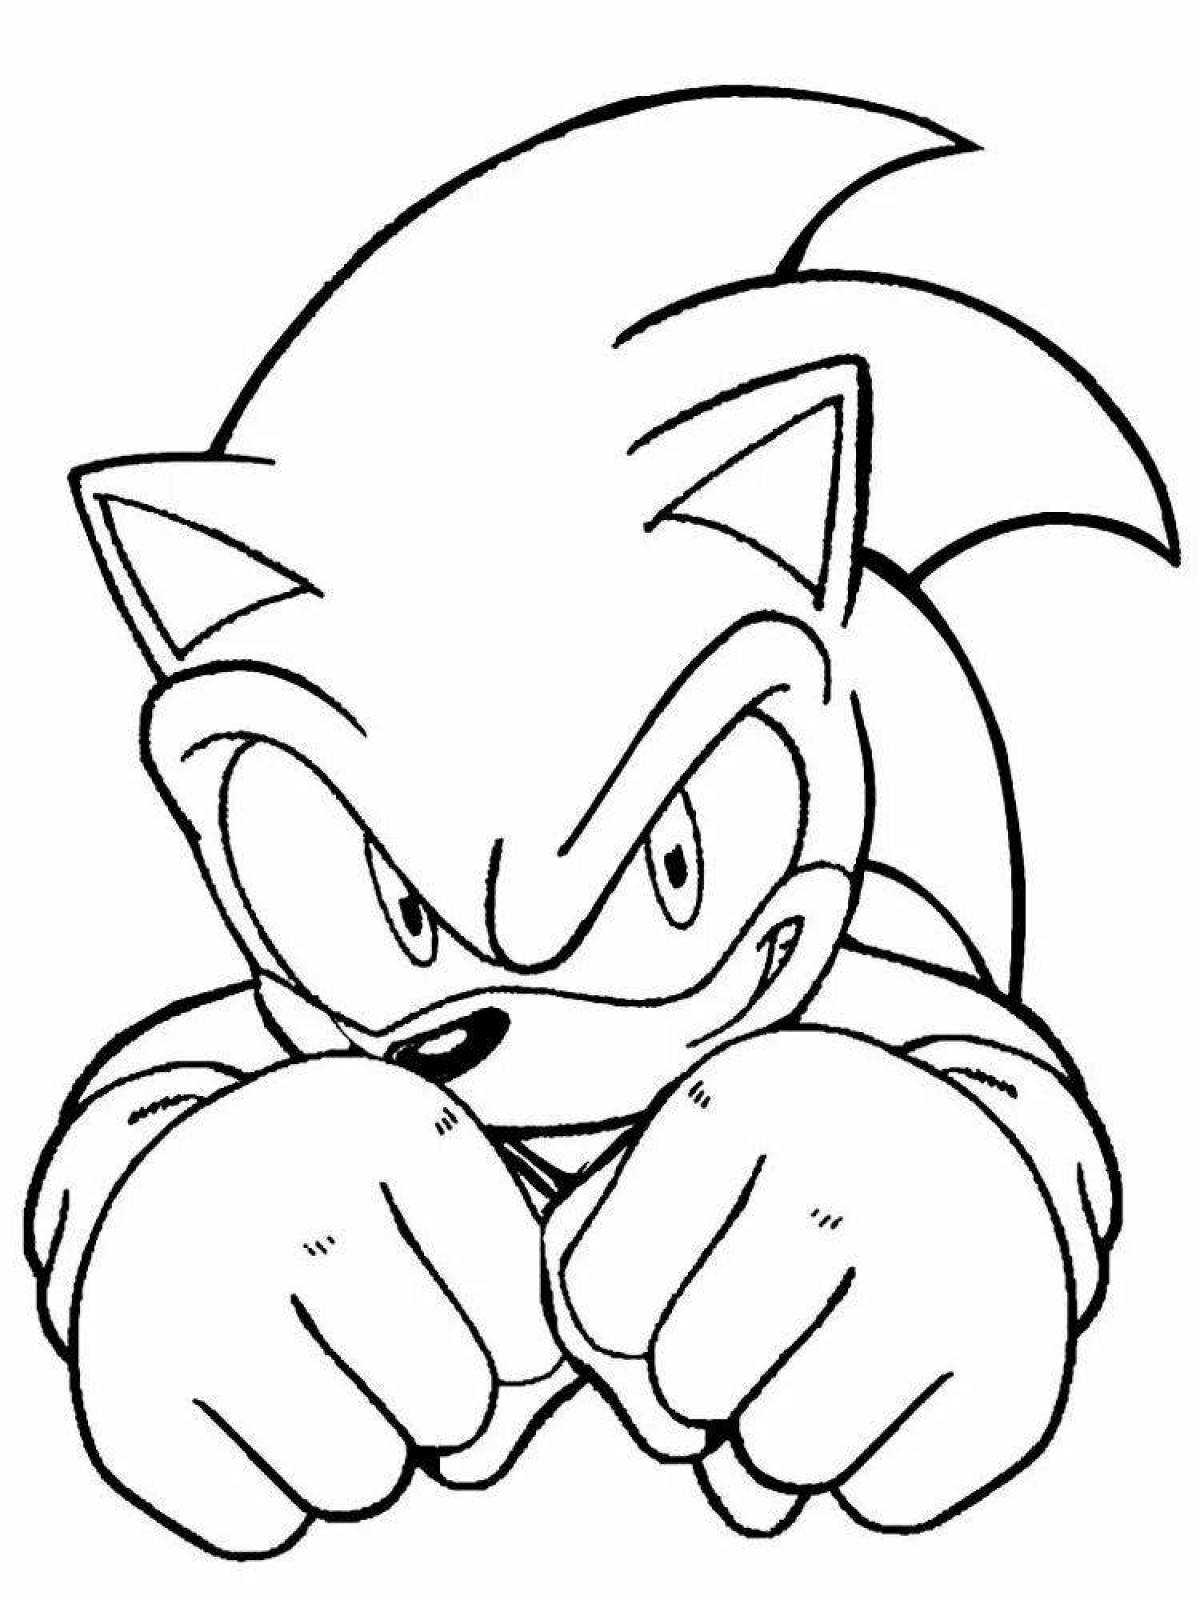 Amazing sonic igze coloring book